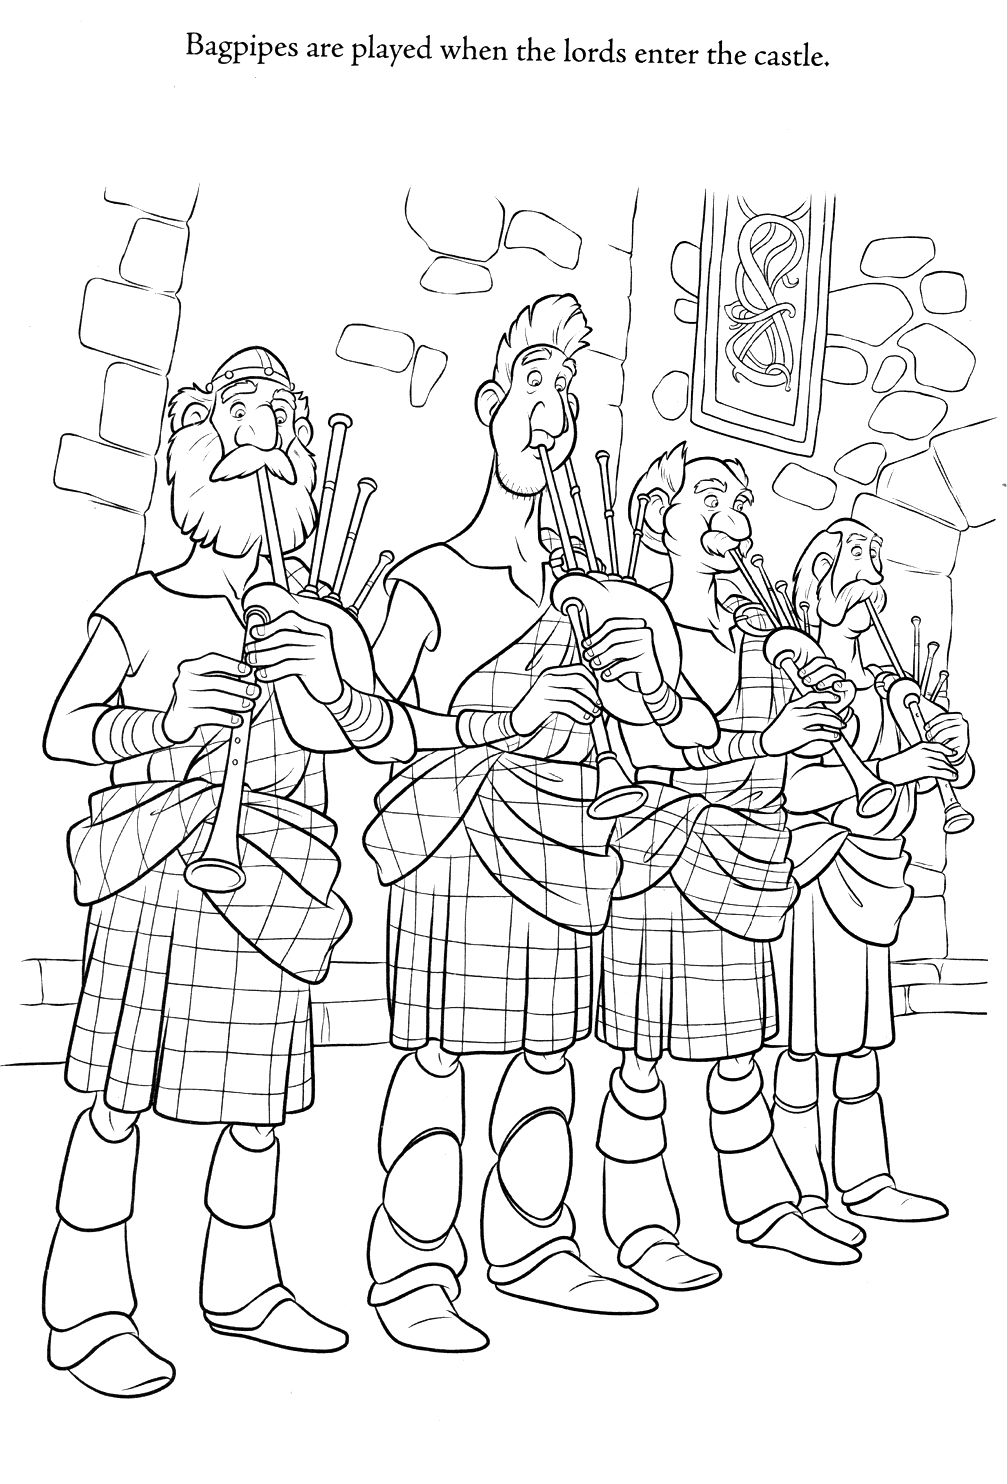 Braves – Bagpipes Coloring Page